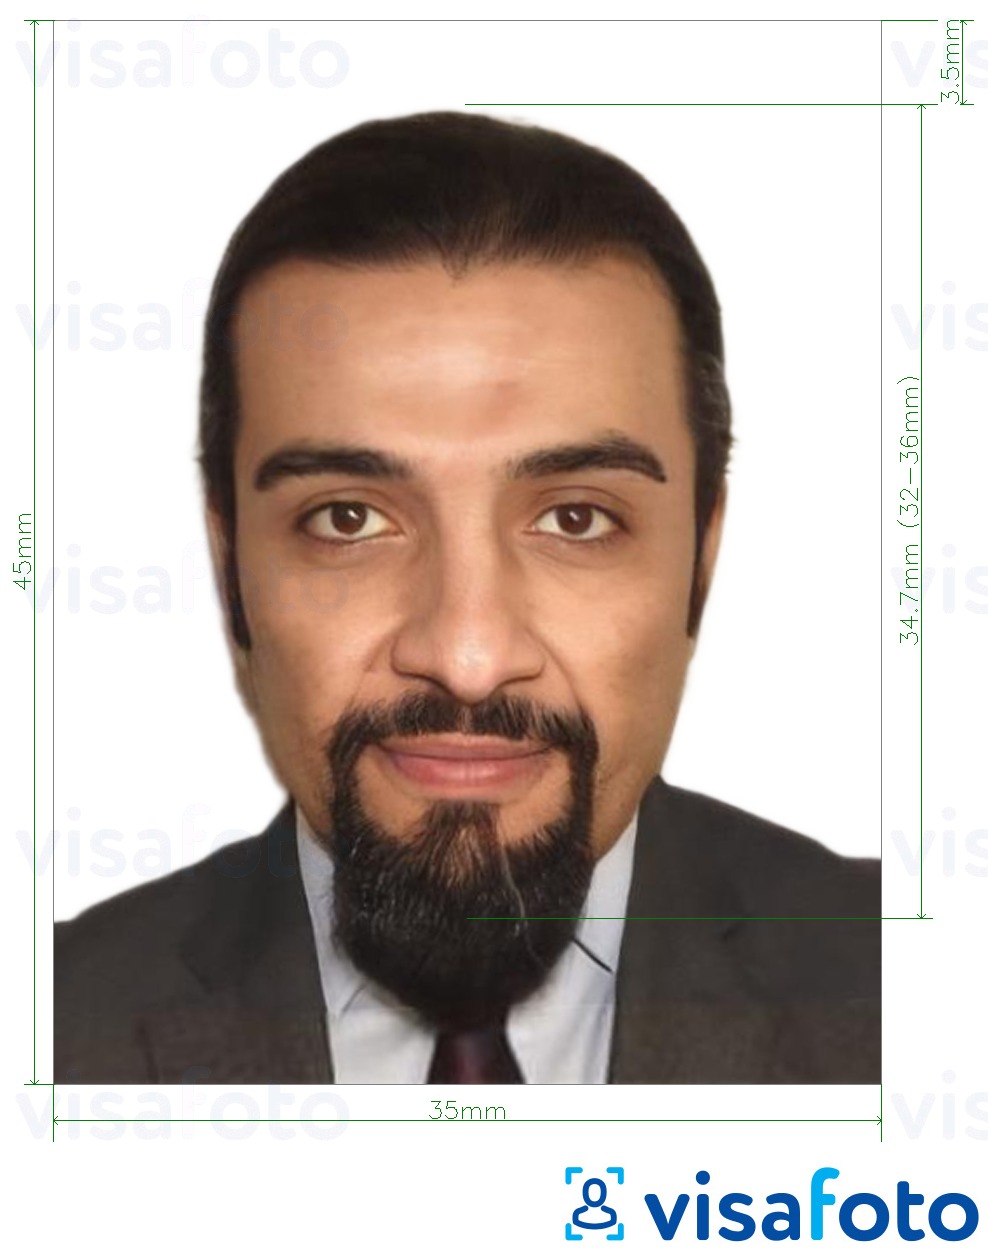 Example of photo for Algeria visa 35x45 mm (3.5x4.5 cm) with exact size specification